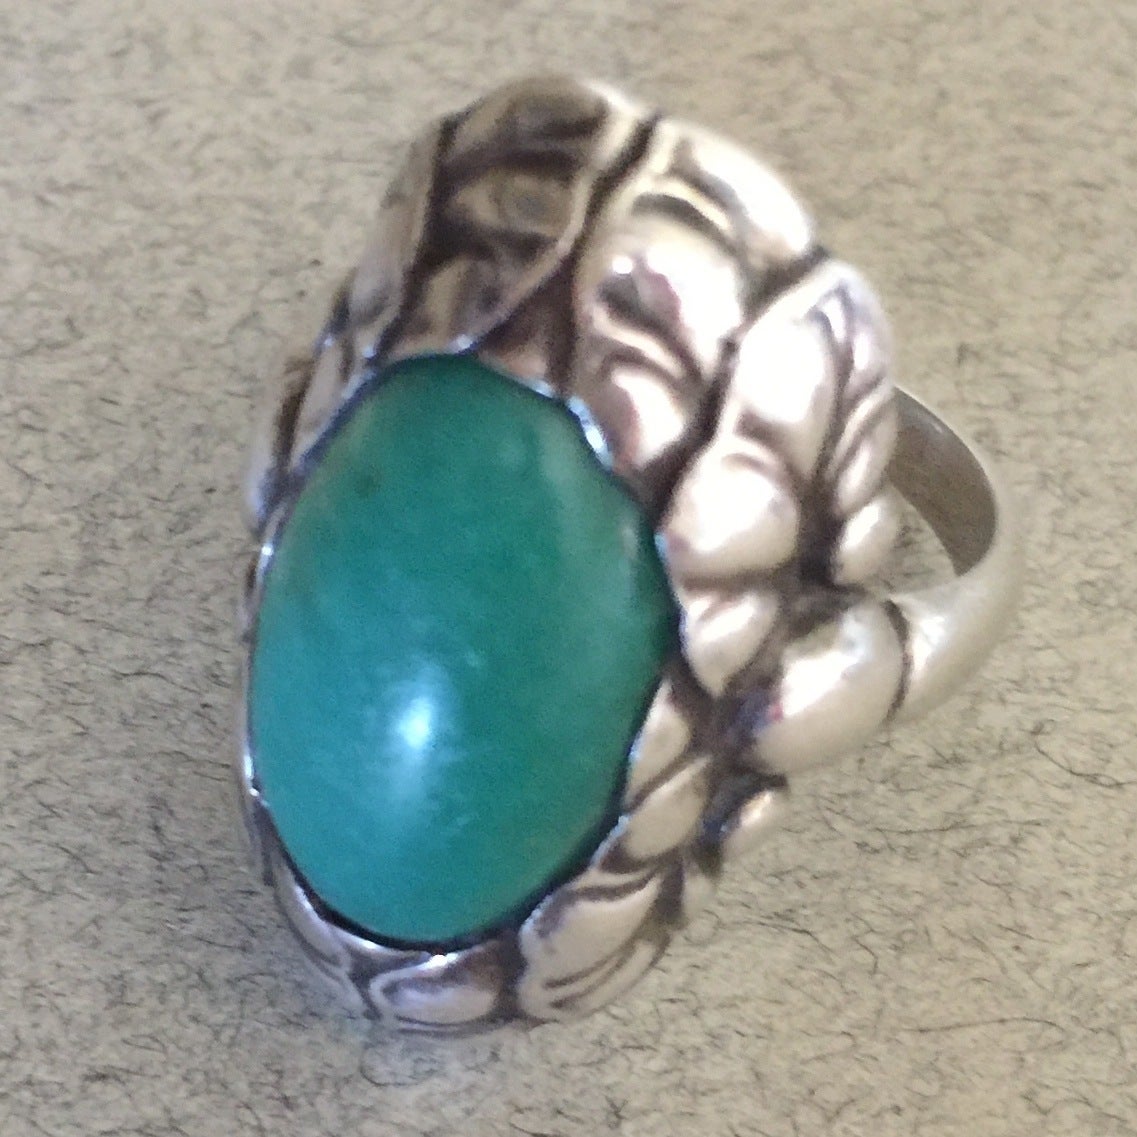 Georg Jensen Ring No. 11 with Amazonite

Wonderful large sterling silver ring that features a vibrant green Amazonite gemstone in the center of a leaf pattern setting. Rare to see in this large size and with Amazonite.

Size 8